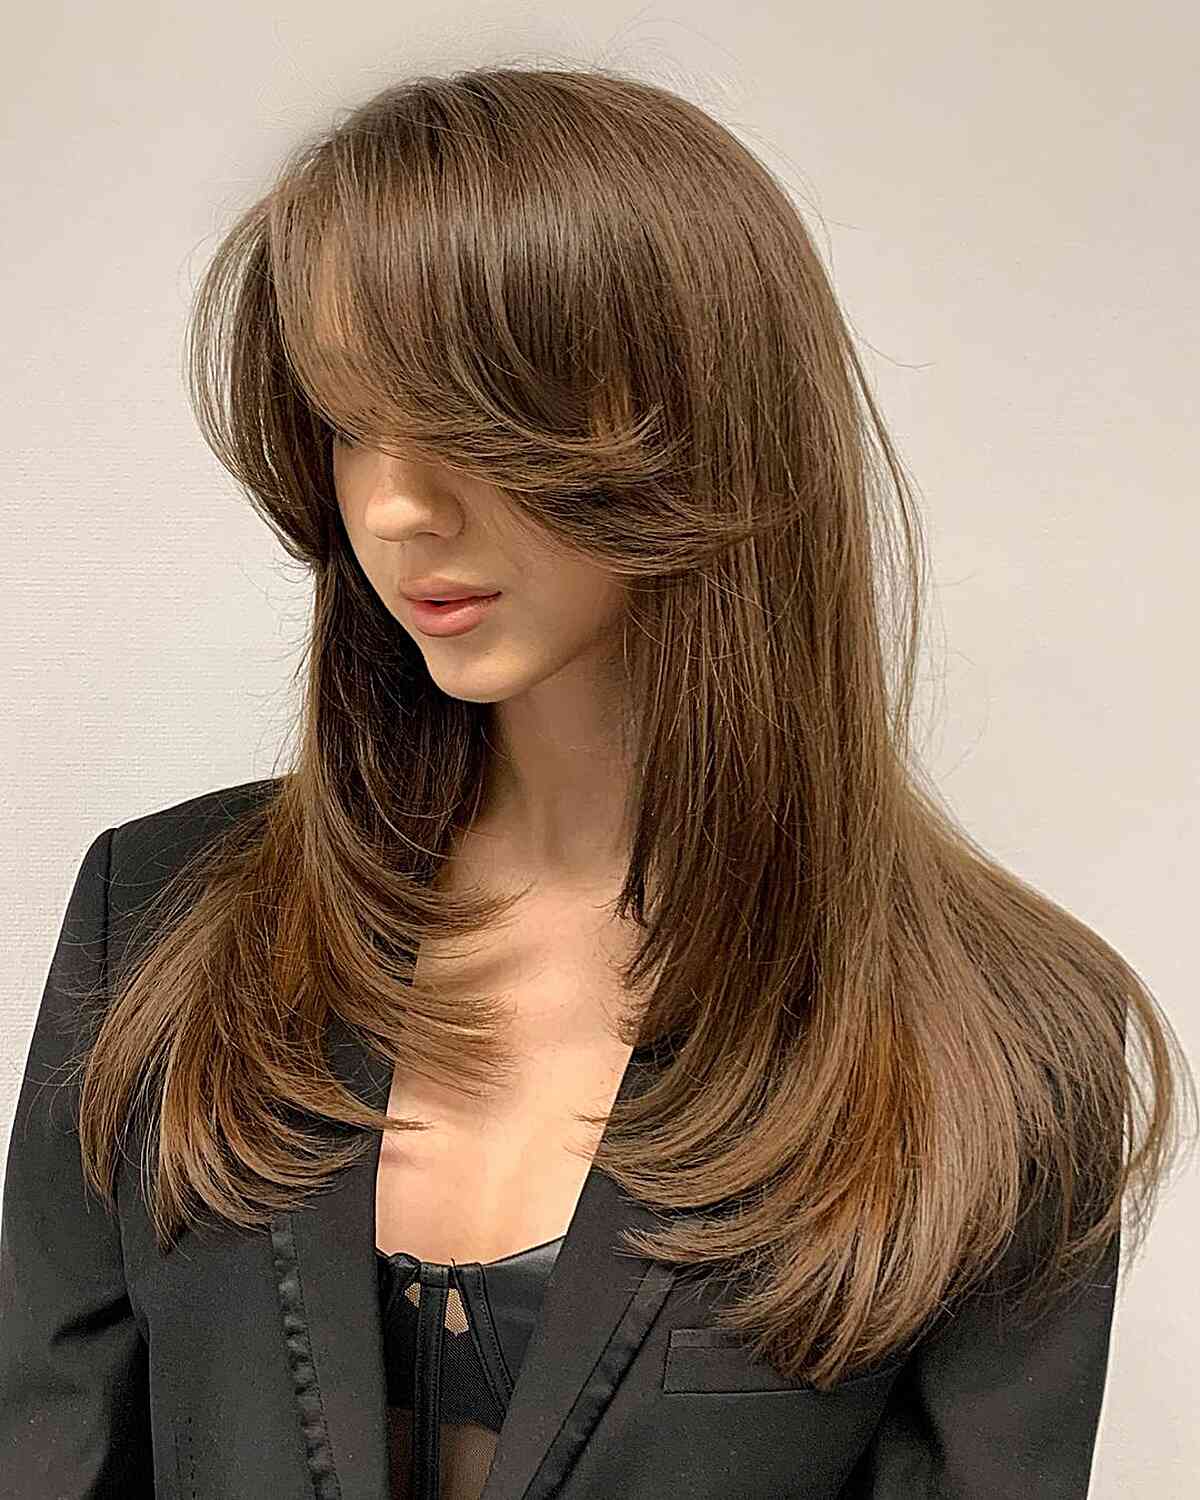 Long Choppy Hair with Short Side Bangs for Ladies